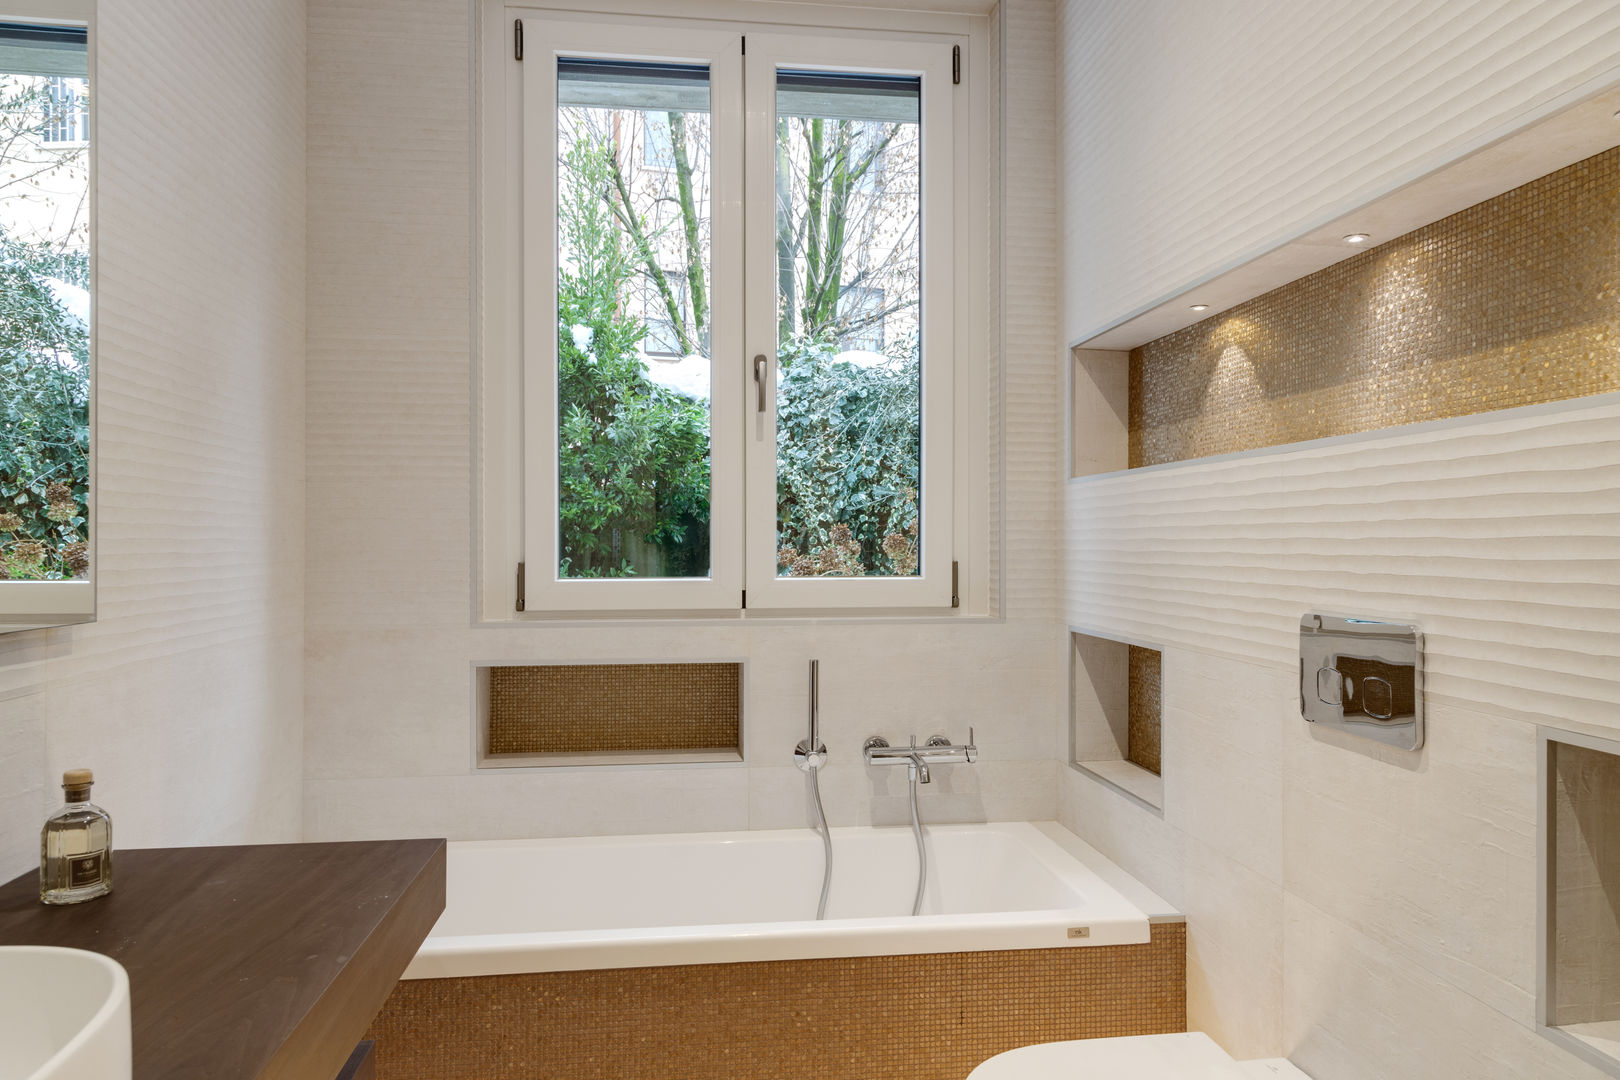 La Belle Époque, Yome - your tailored home Yome - your tailored home Modern bathroom